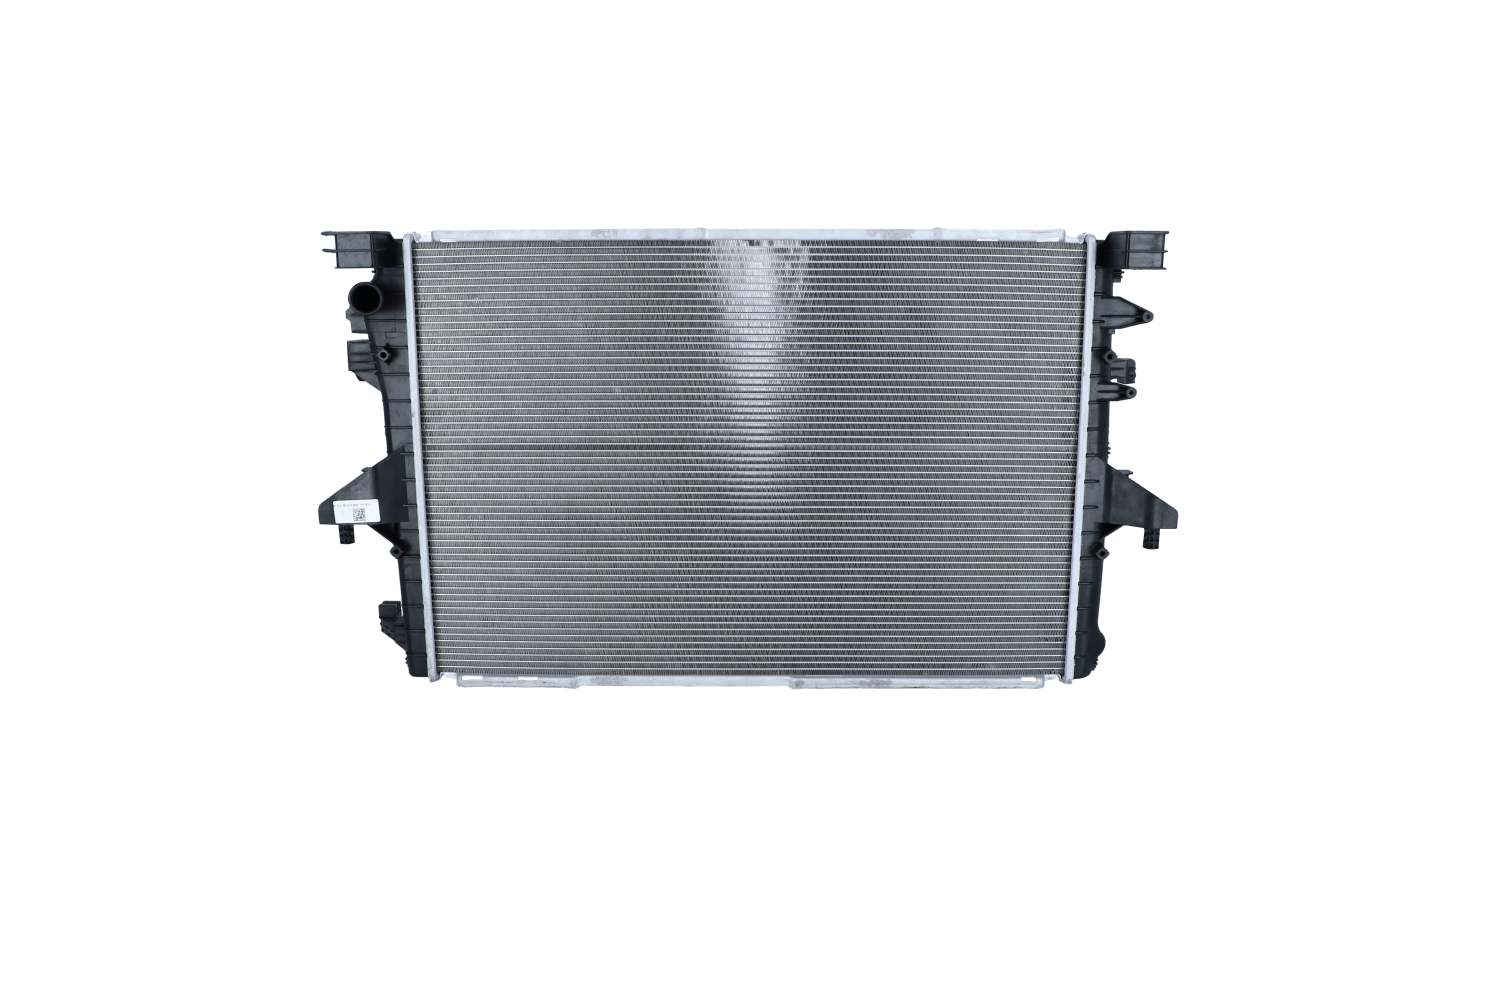 NRF 53154 Engine radiator Aluminium, 710 x 469 x 28 mm, with mounting parts, Brazed cooling fins